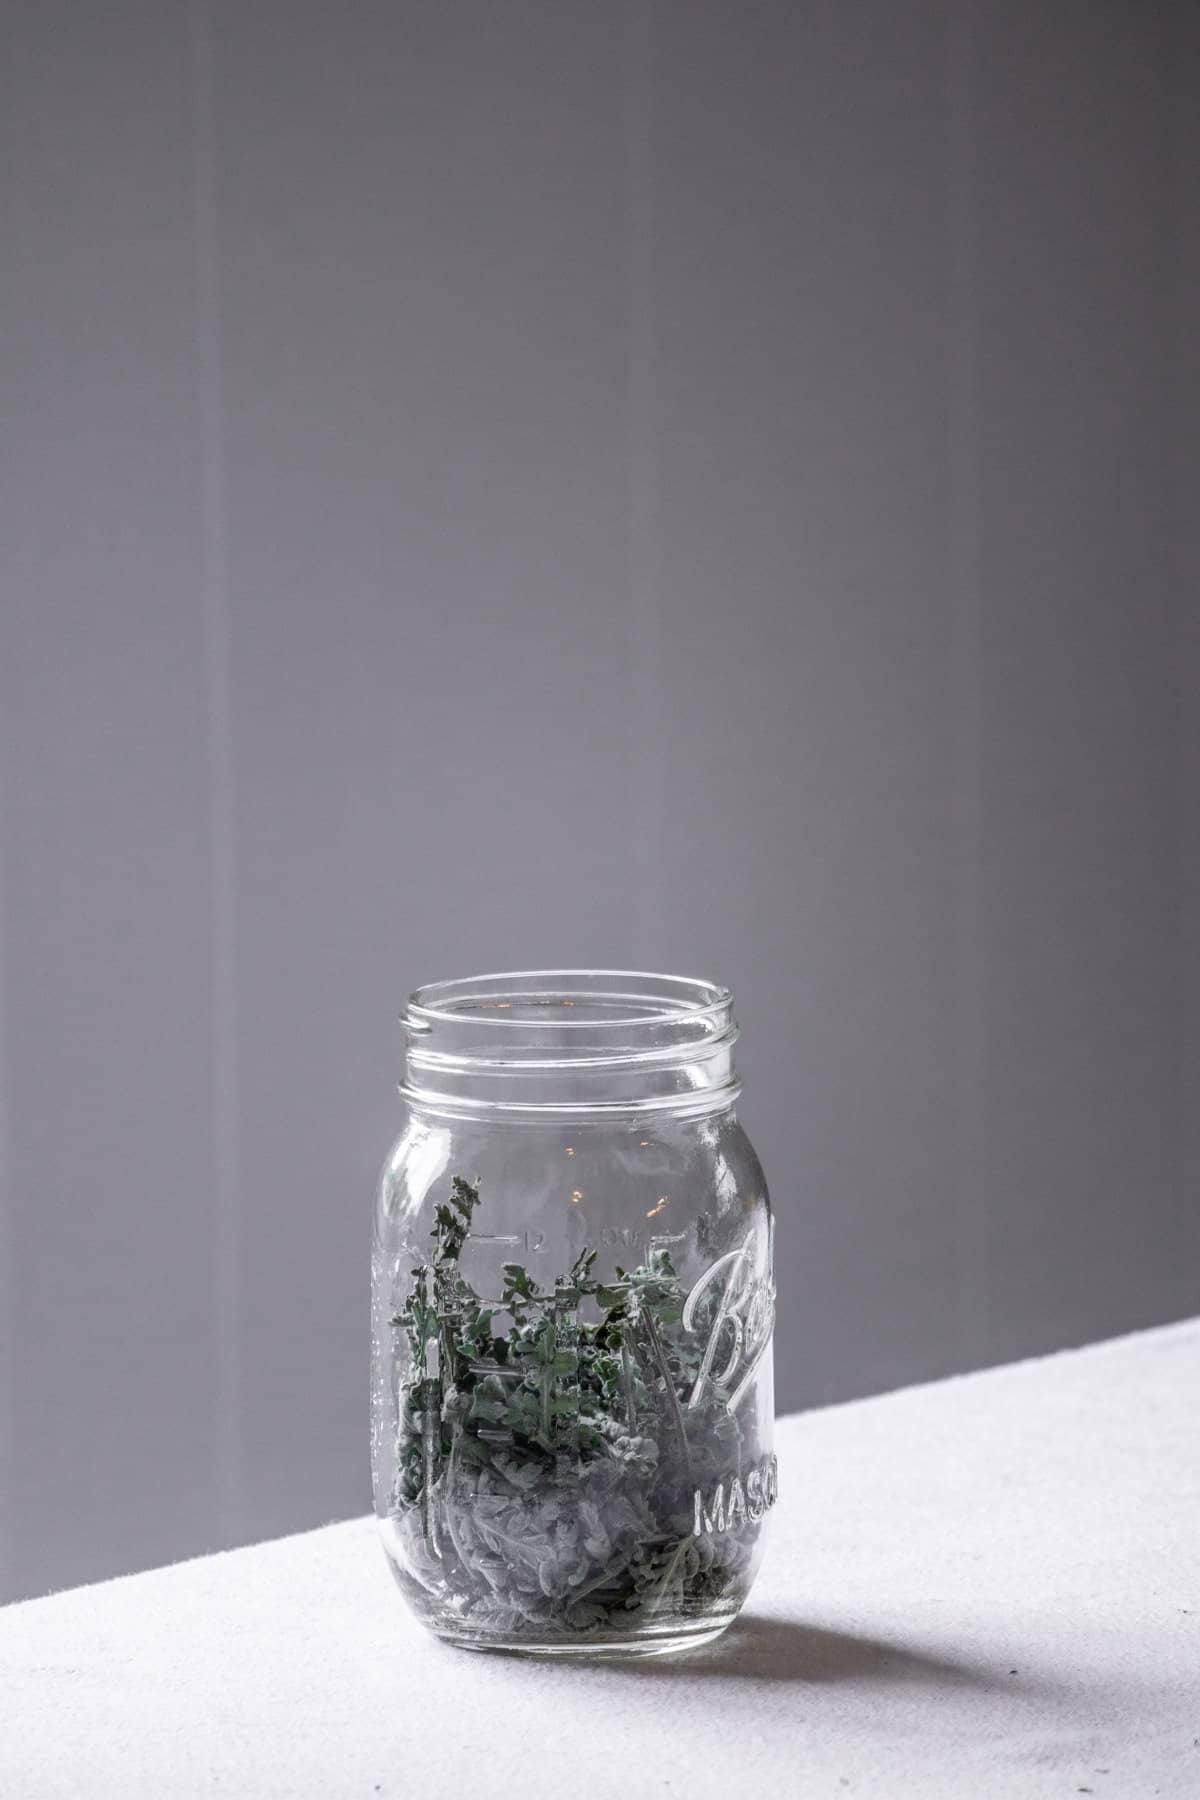 Jar filled with dried yarrow leaves